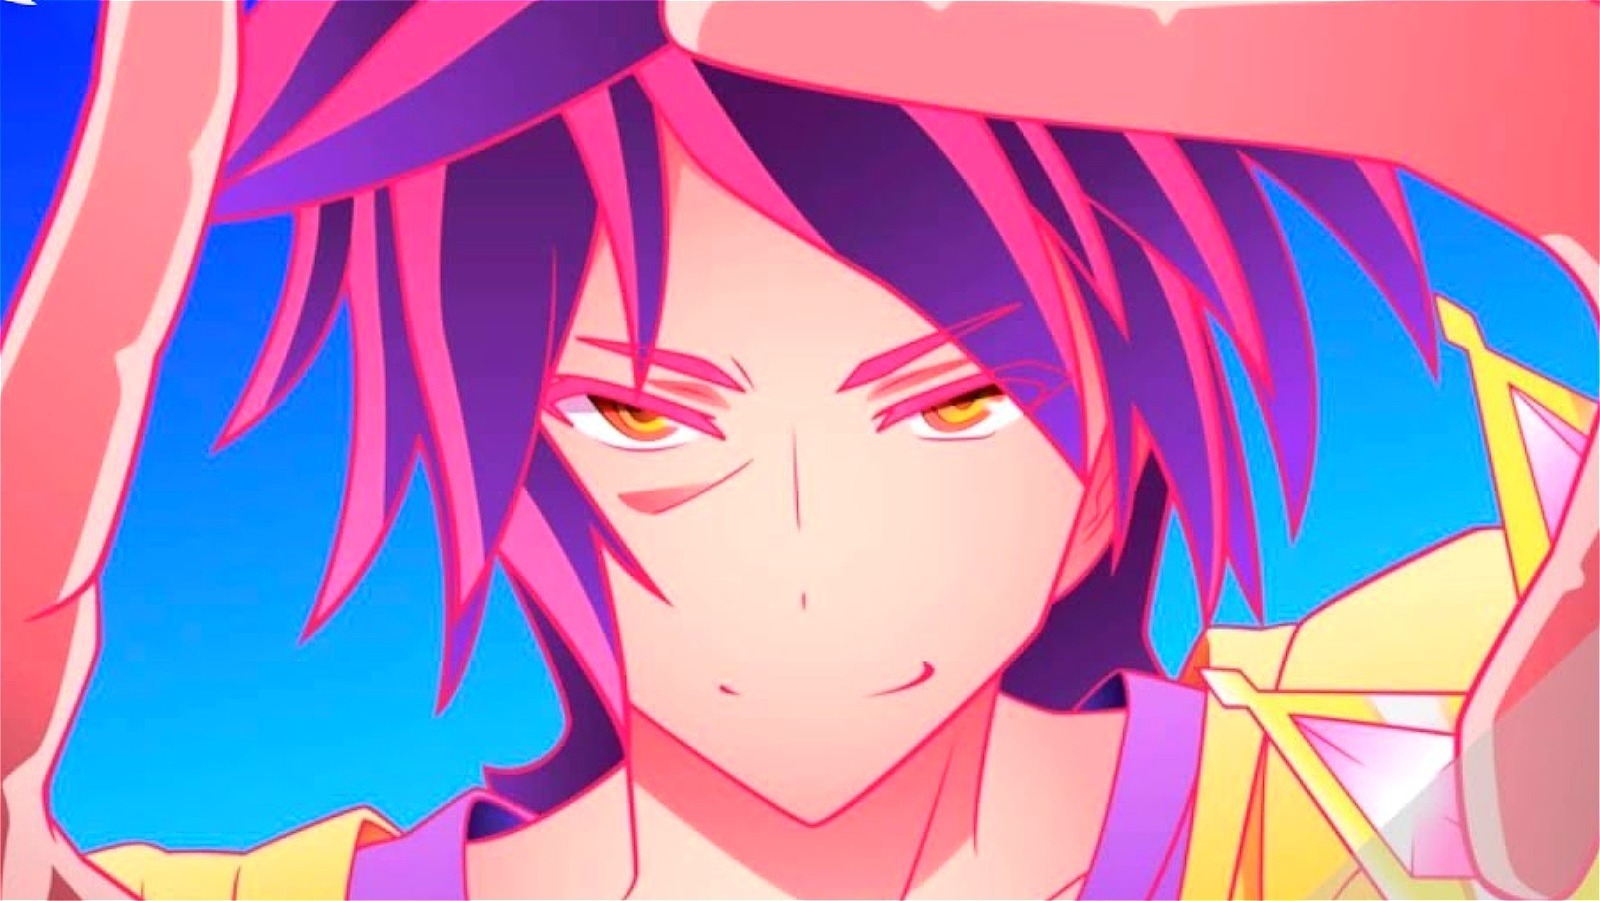 Are there any plans for a second season of No Game No Life? - Quora